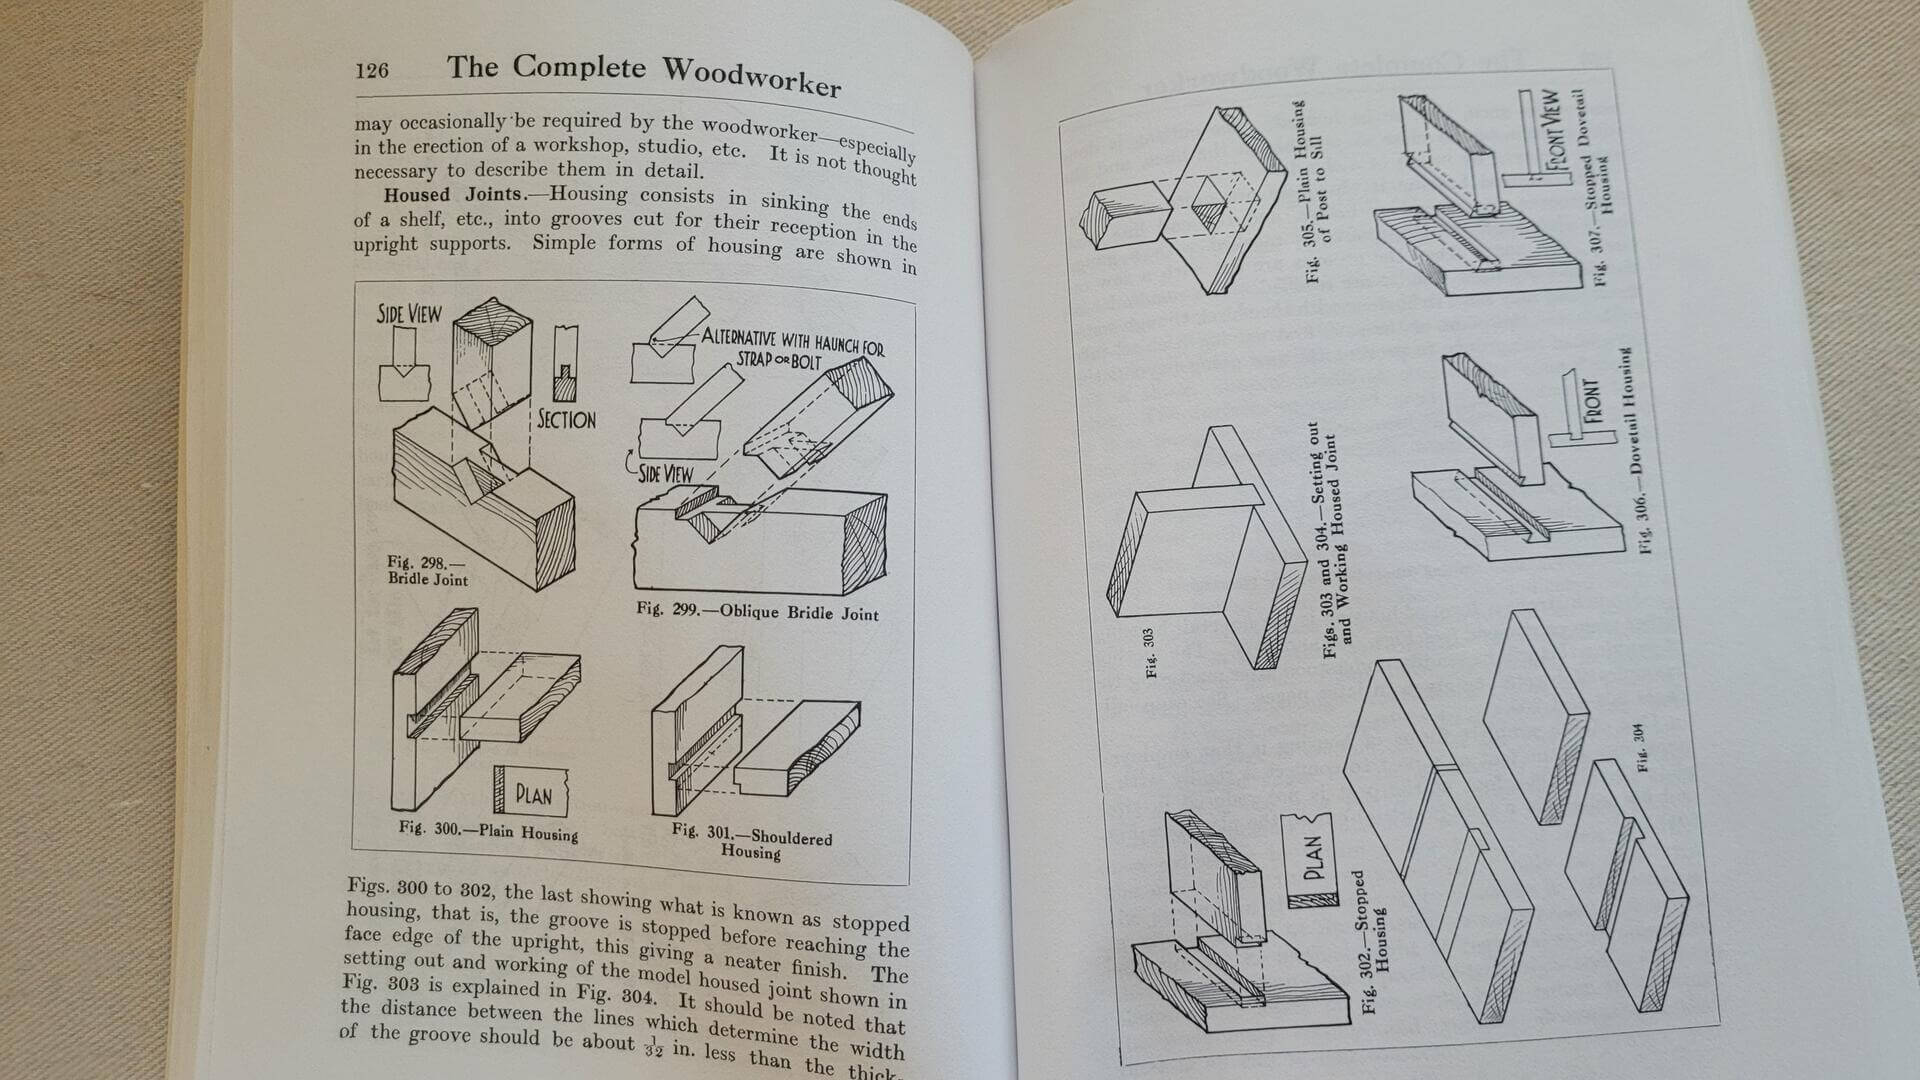 The Complete Woodworker - For the Craftsman or the Begginer book edited by Jones, Bernard E. and published reprint edition by Ten Speed Press in 1998